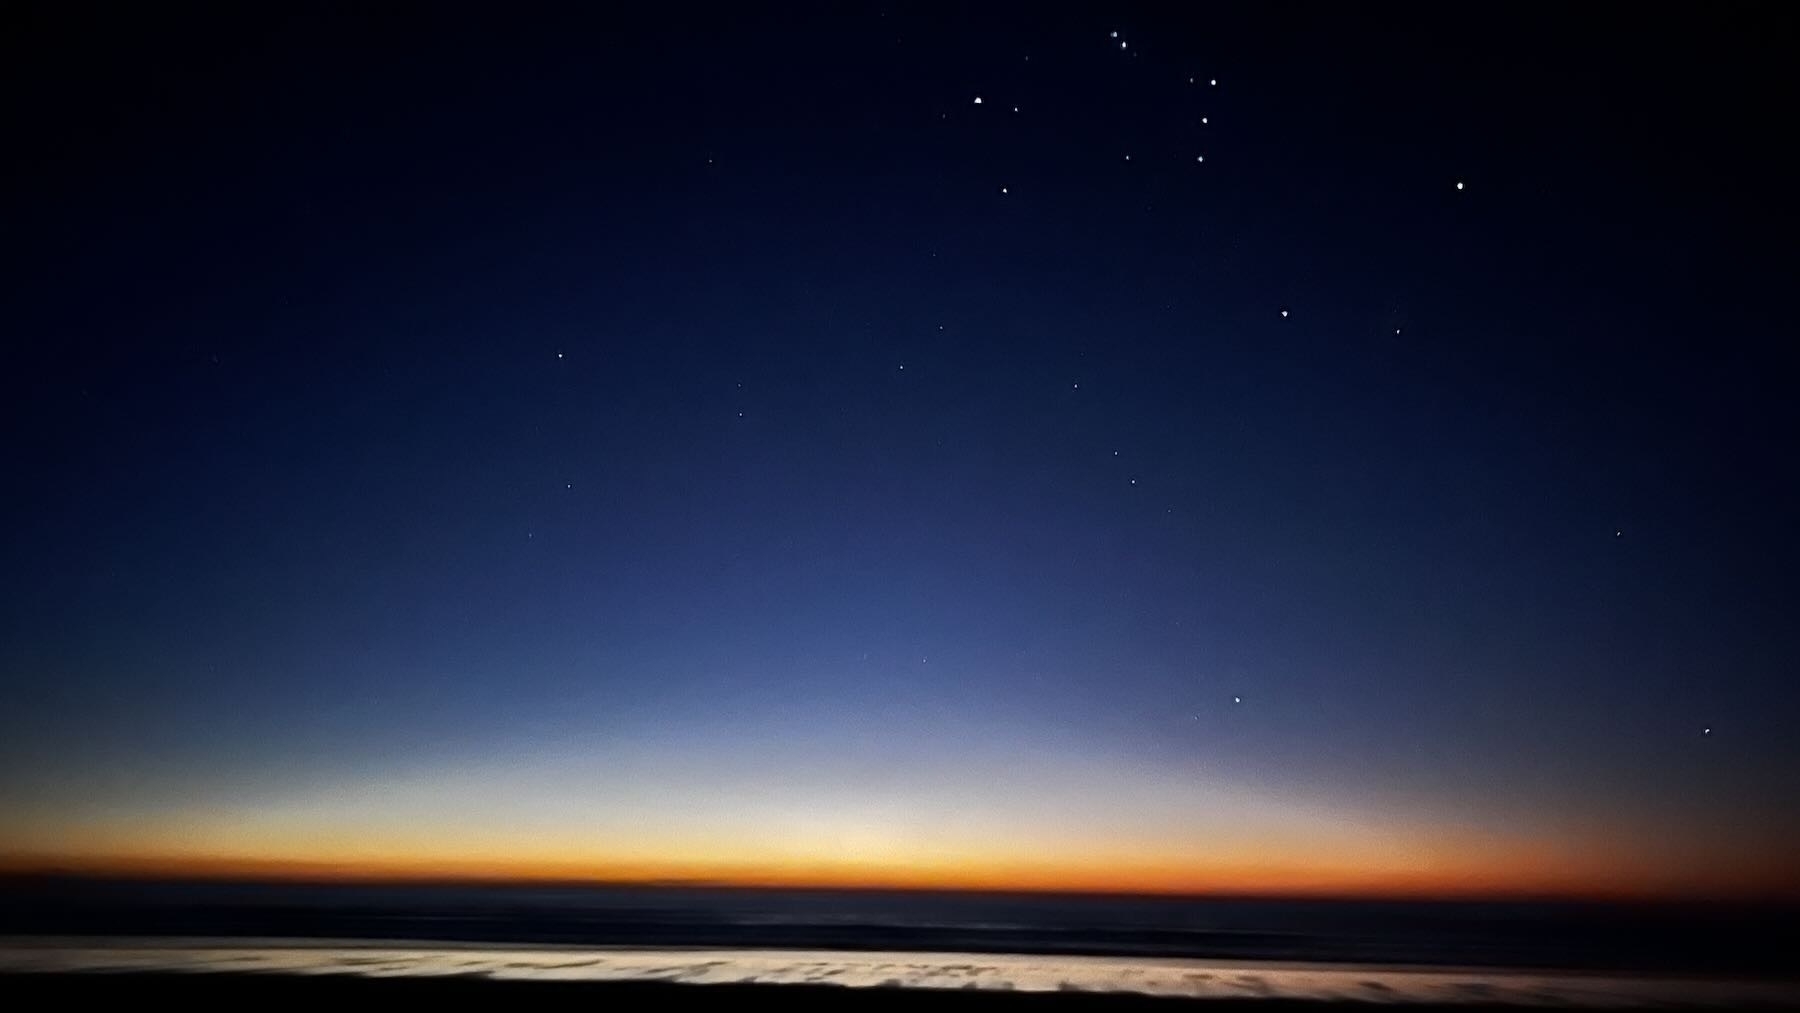 In the foreground a bright patch of damp sand, then a line of dar sea and a bright band of sky where the sun had recently set, with darker blue above in which the constellation of Orion can be made out.